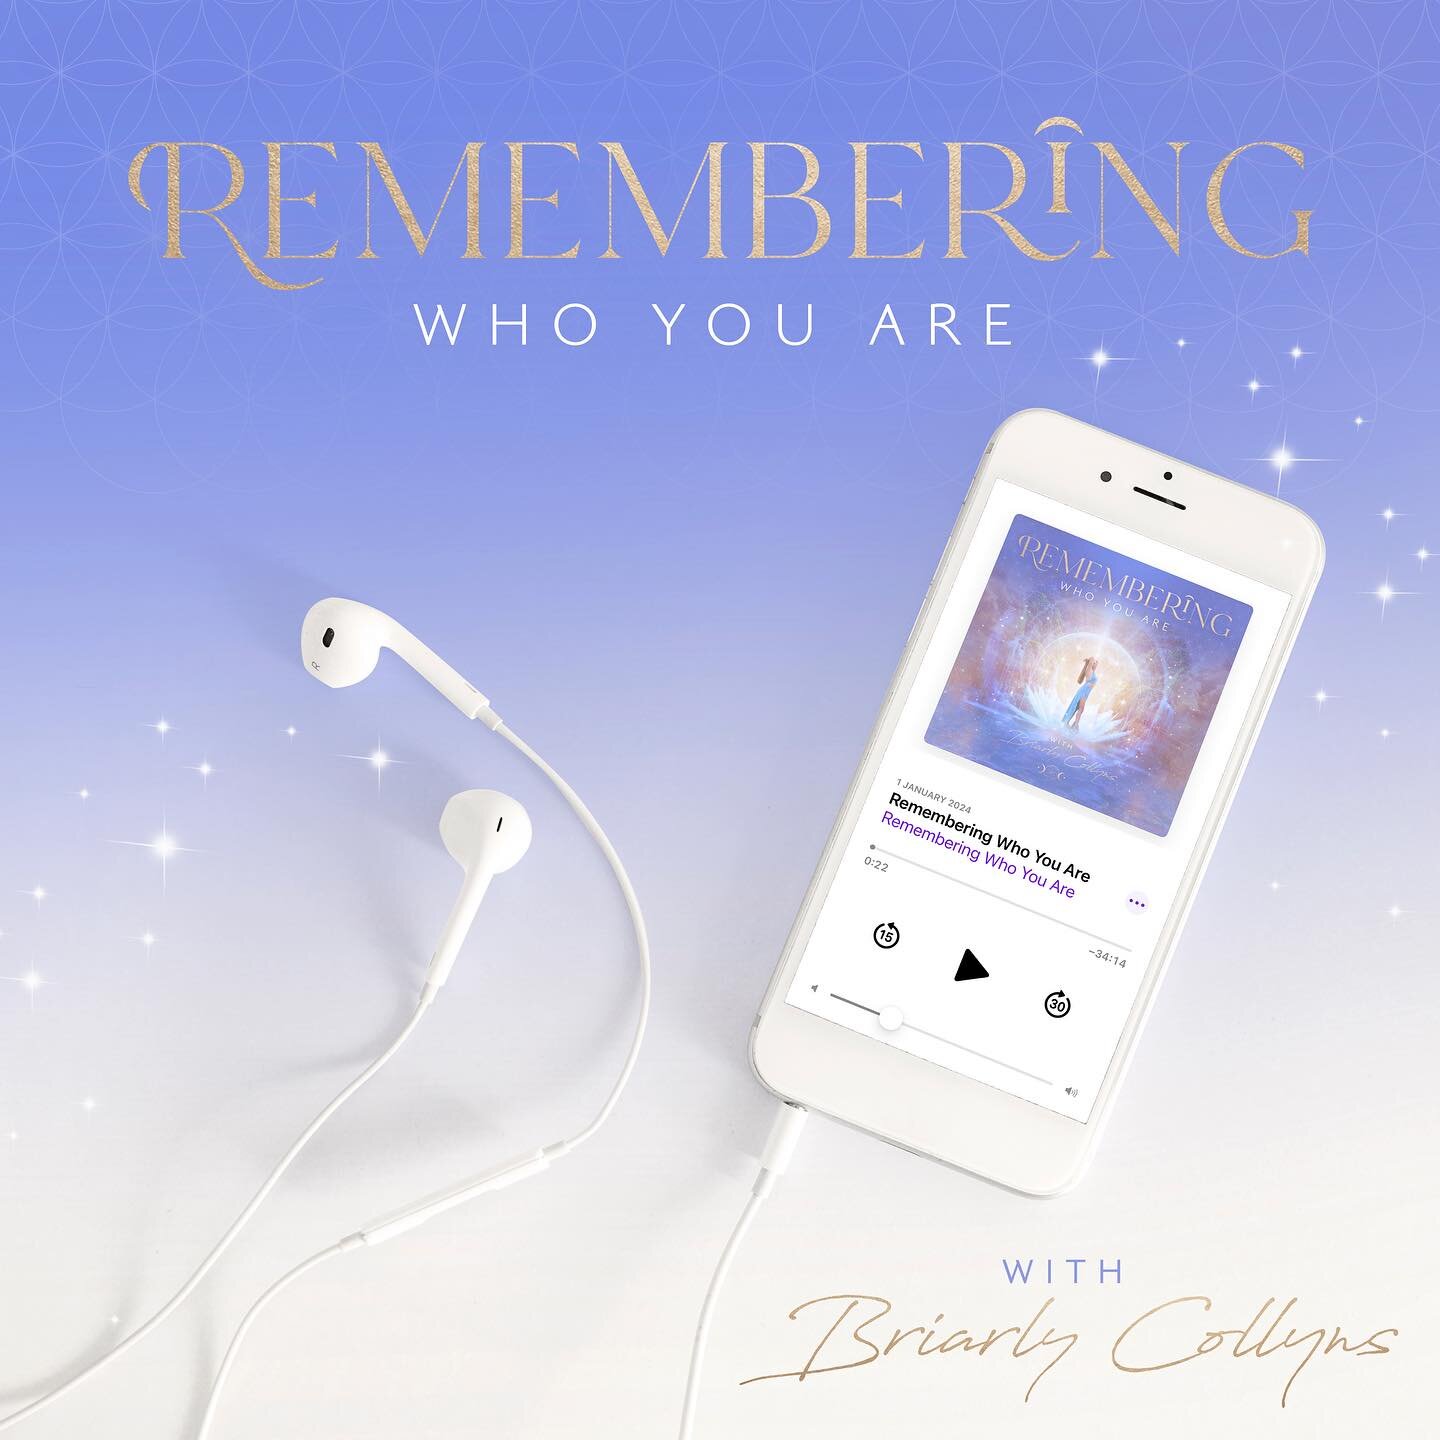 I&rsquo;m so excited to announce that &lsquo;Remembering Who You Are Podcast&rsquo; is now officially LIVE on both Spotify &amp; iTunes 🪷

It is by remembering who we are, that we are able to reclaim our power, rise beyond life&rsquo;s challenges &a